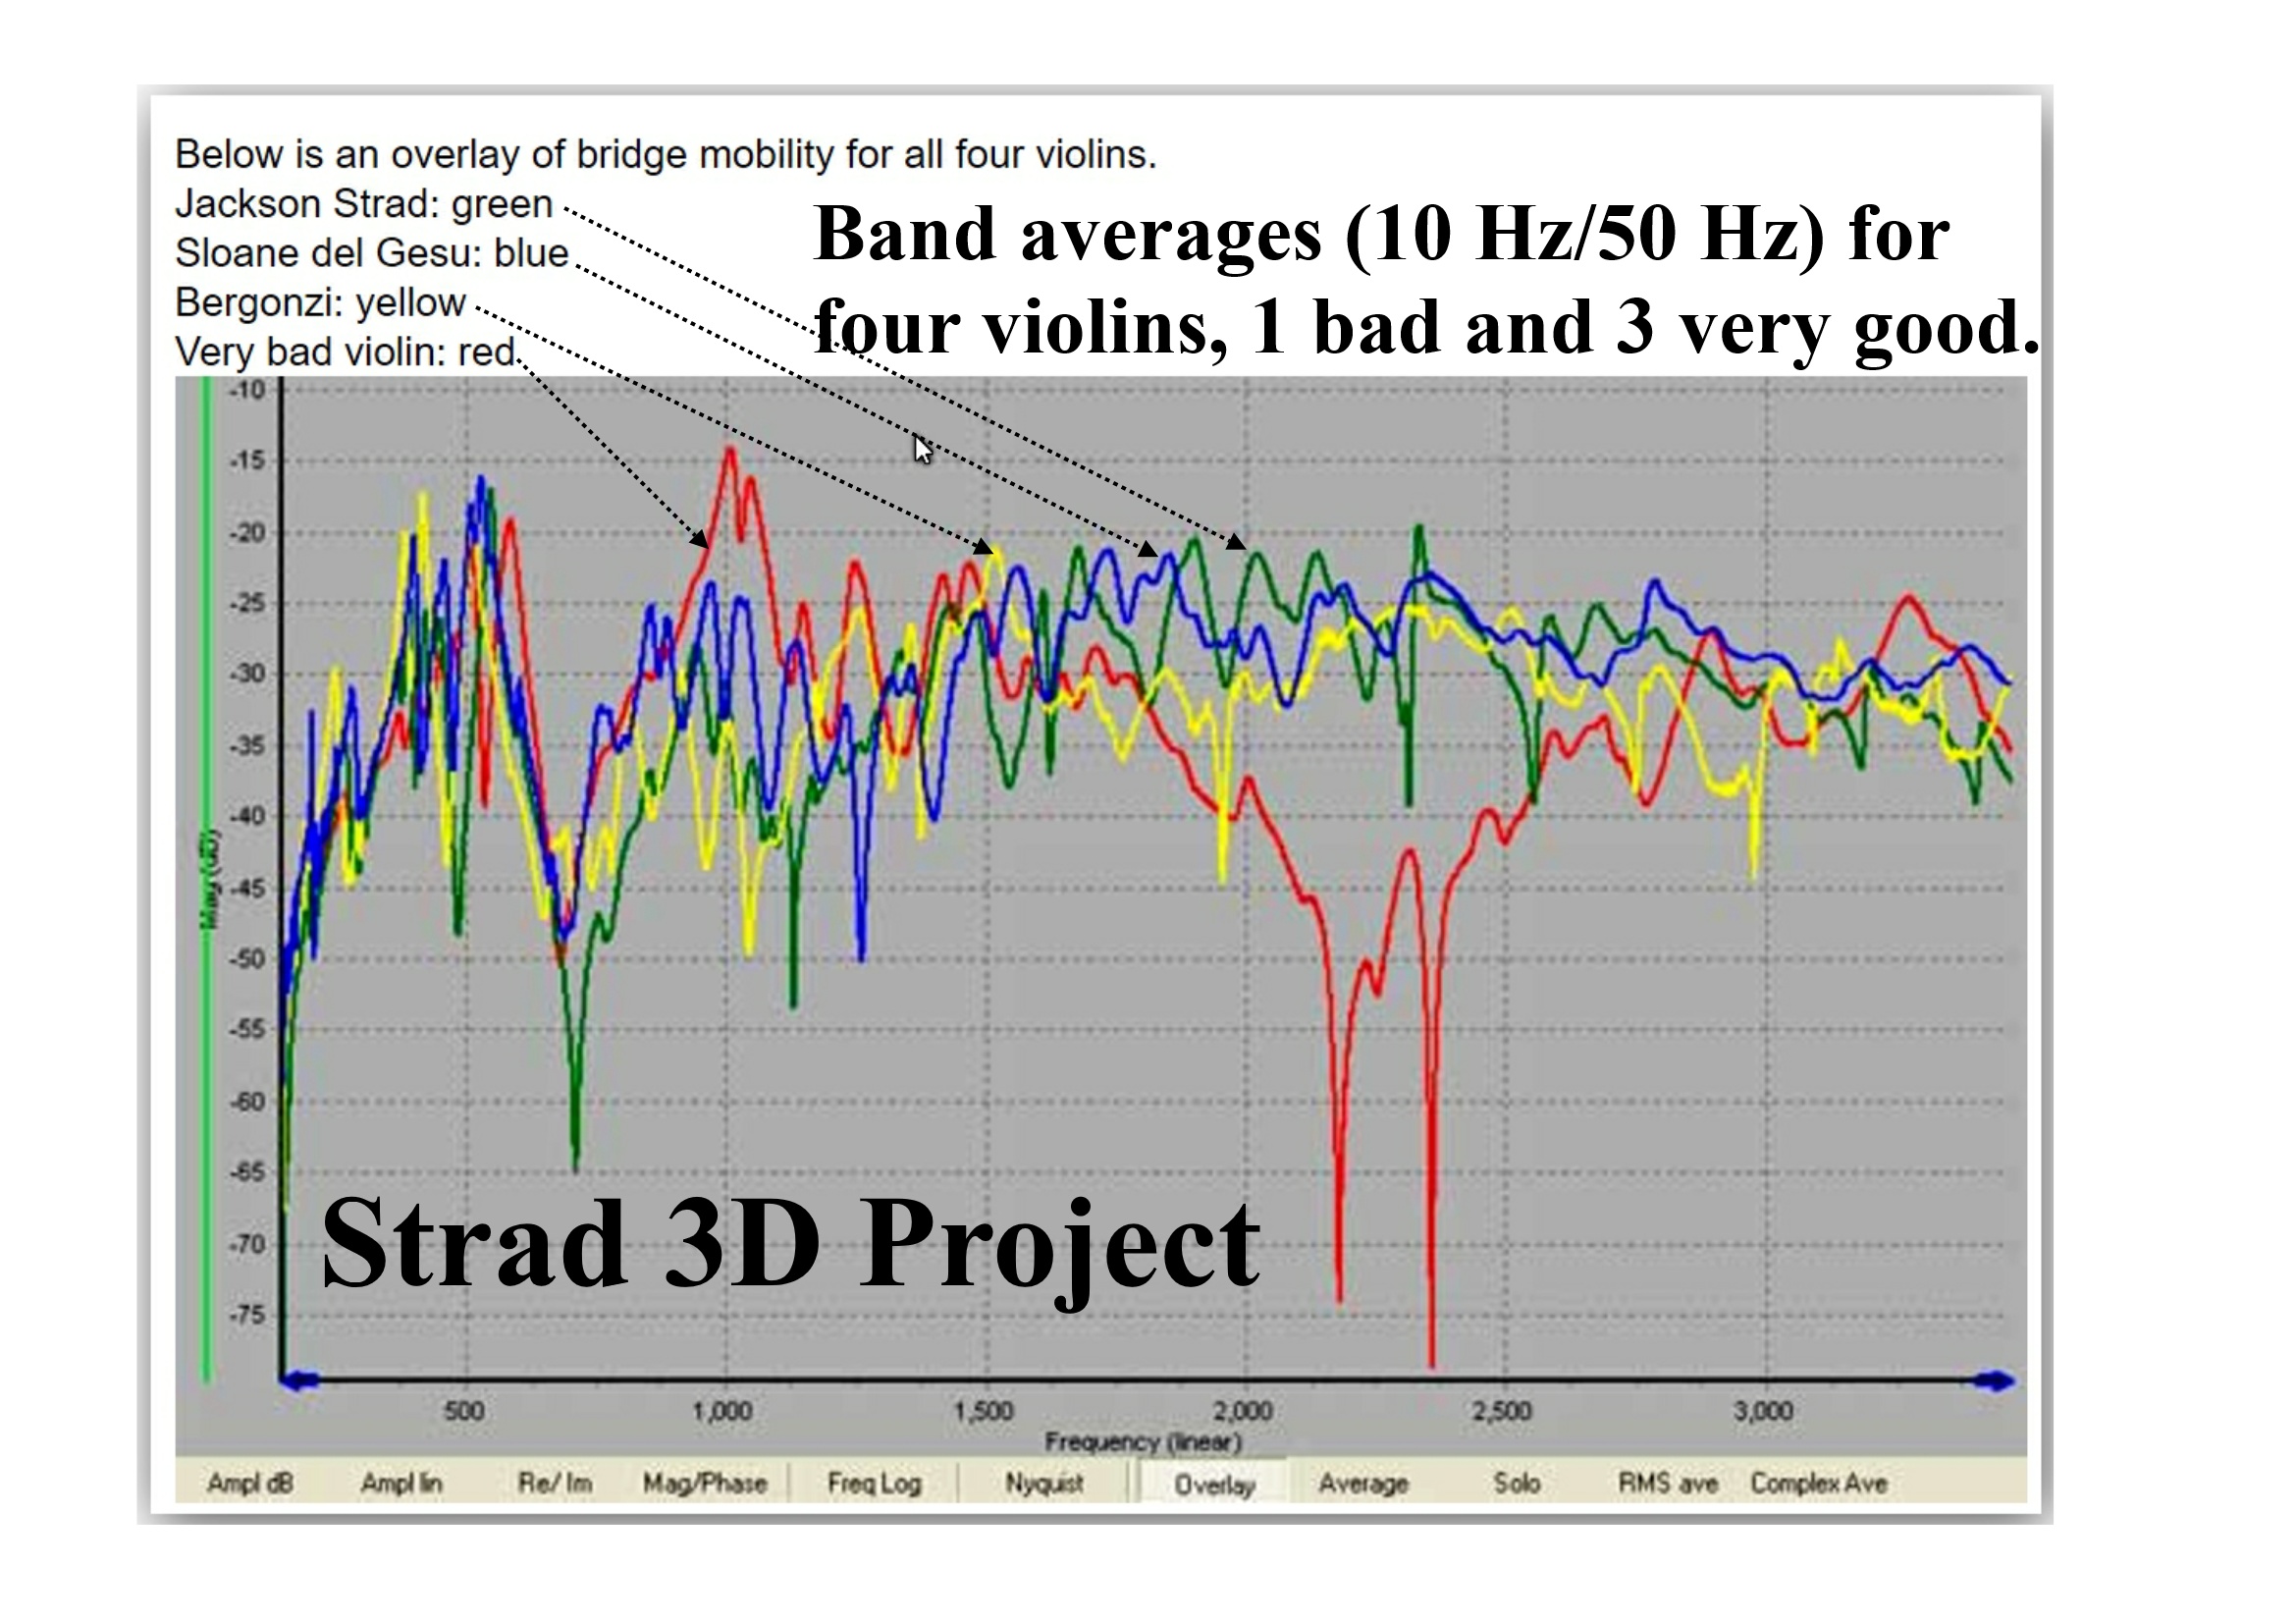 Strad 3D project band averages 1